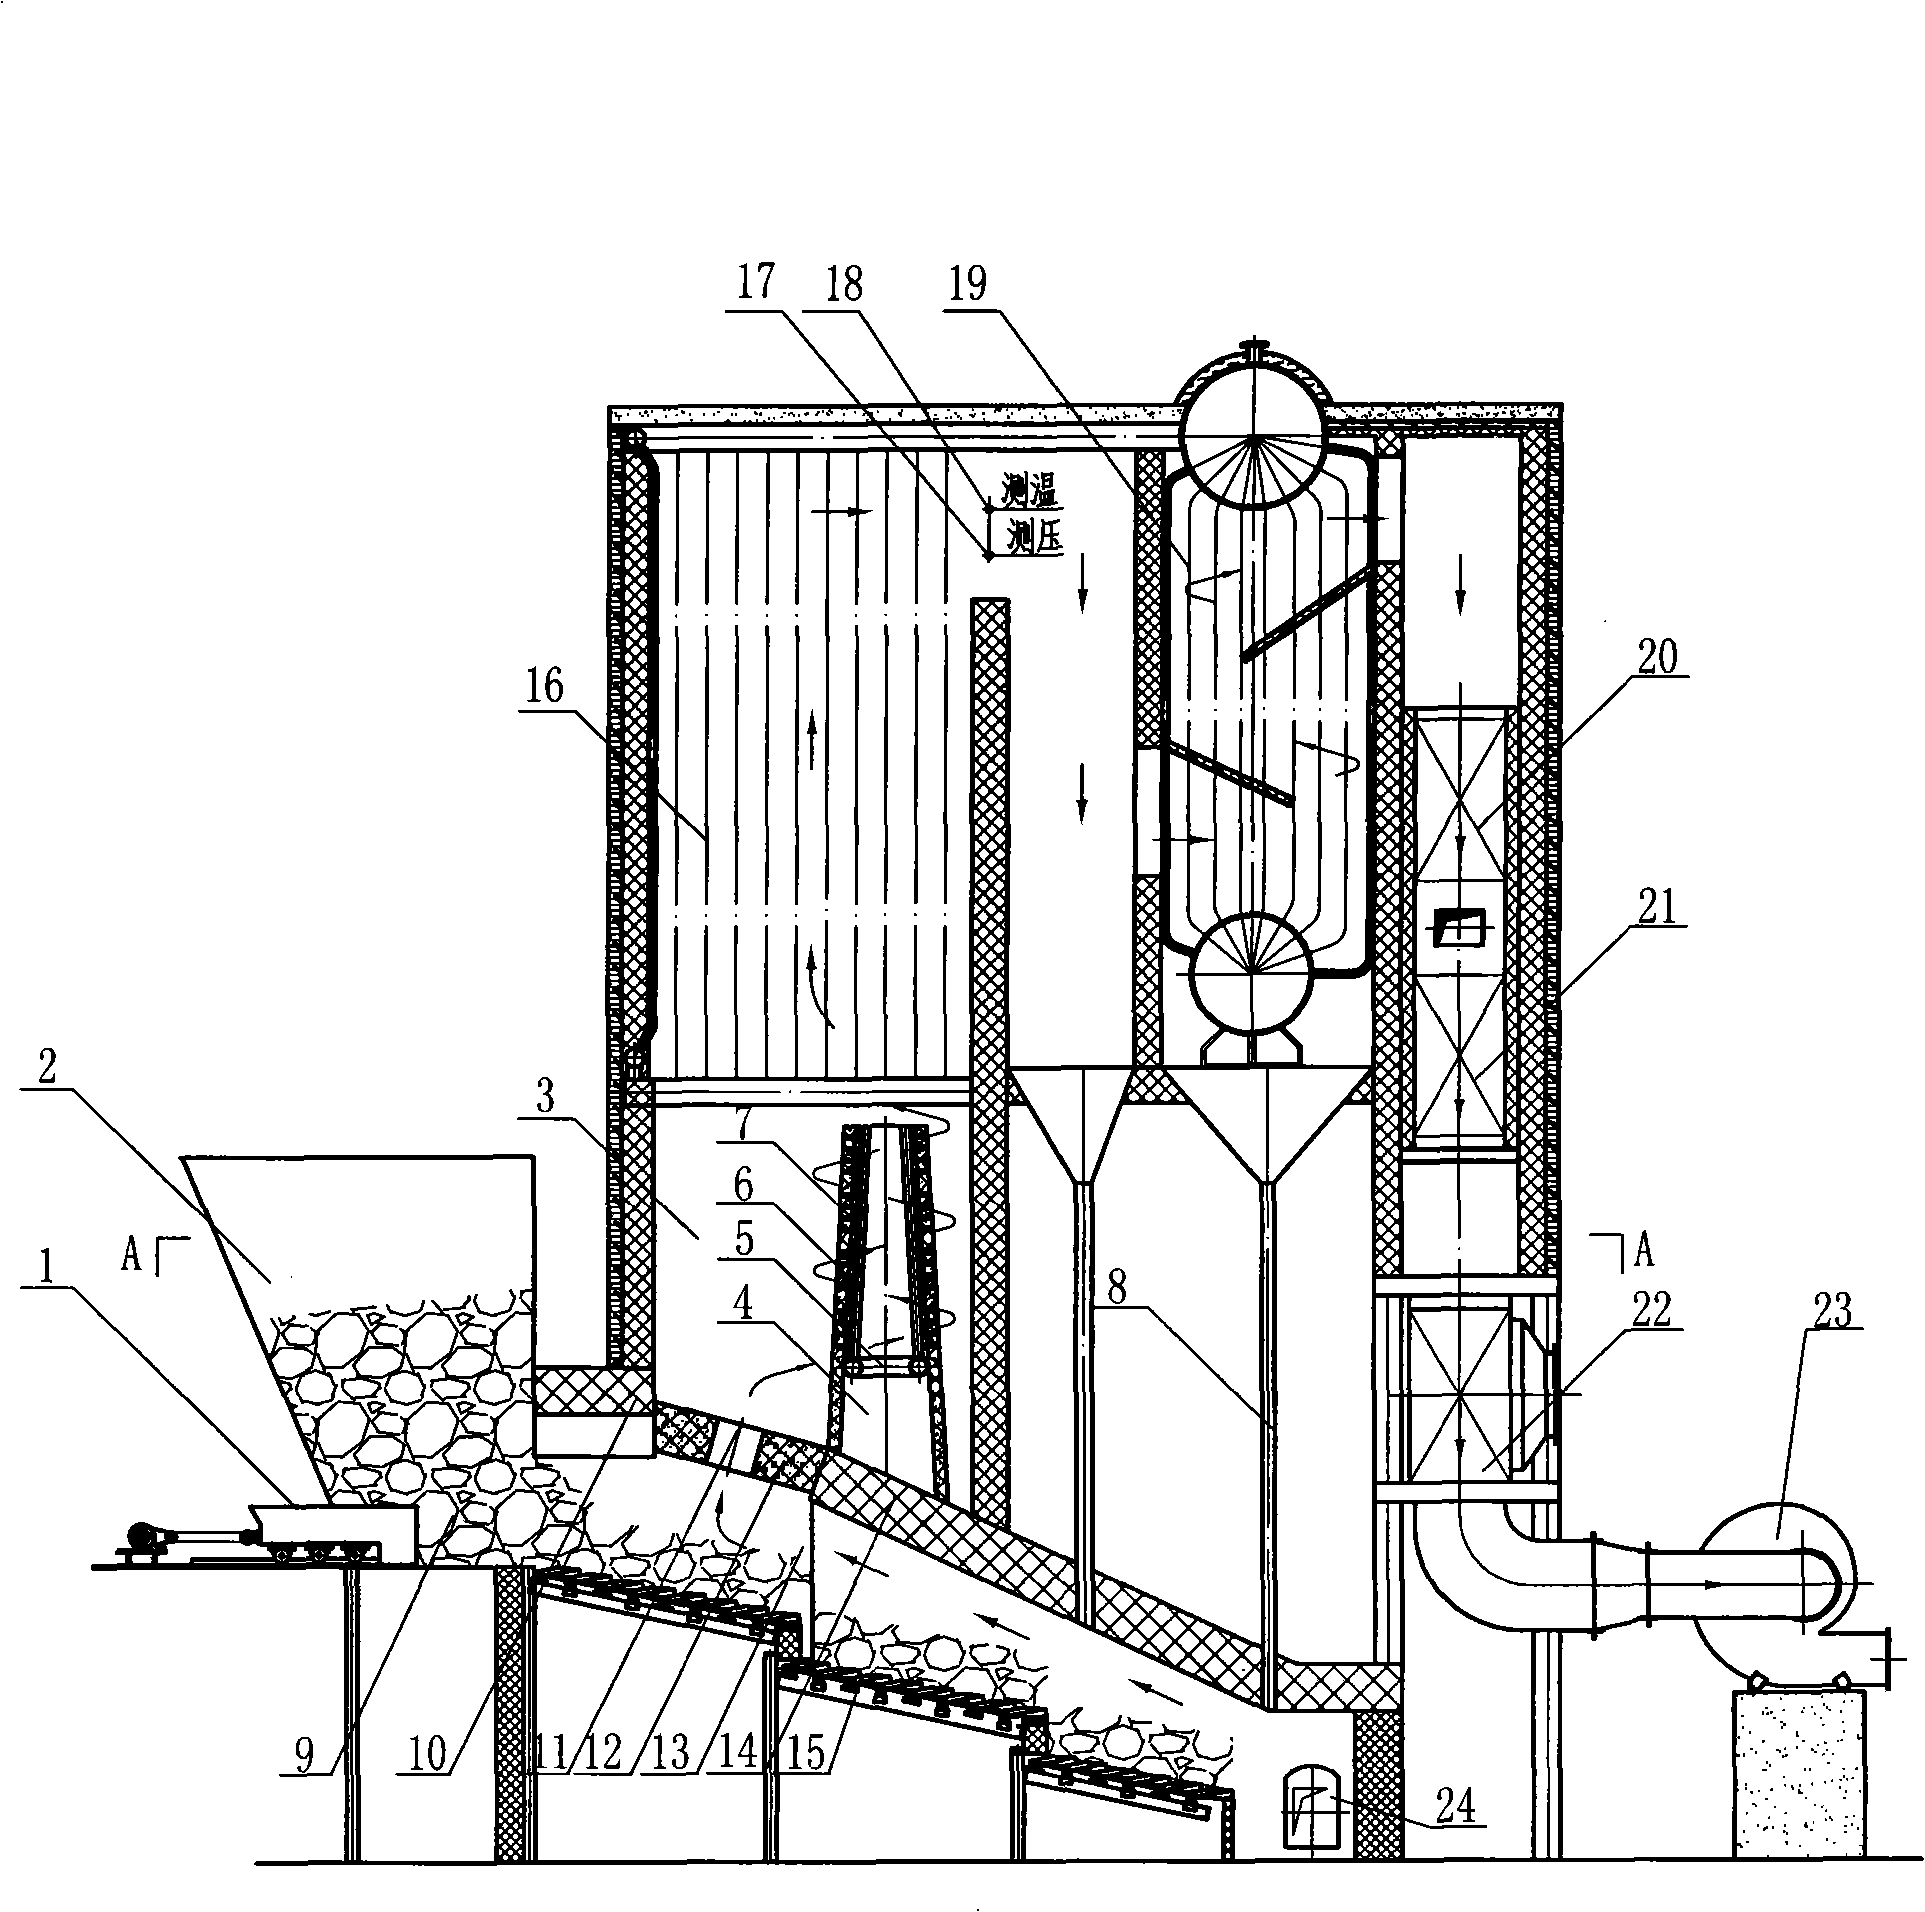 Garbage incinerator with whirlpool arch and thermal island